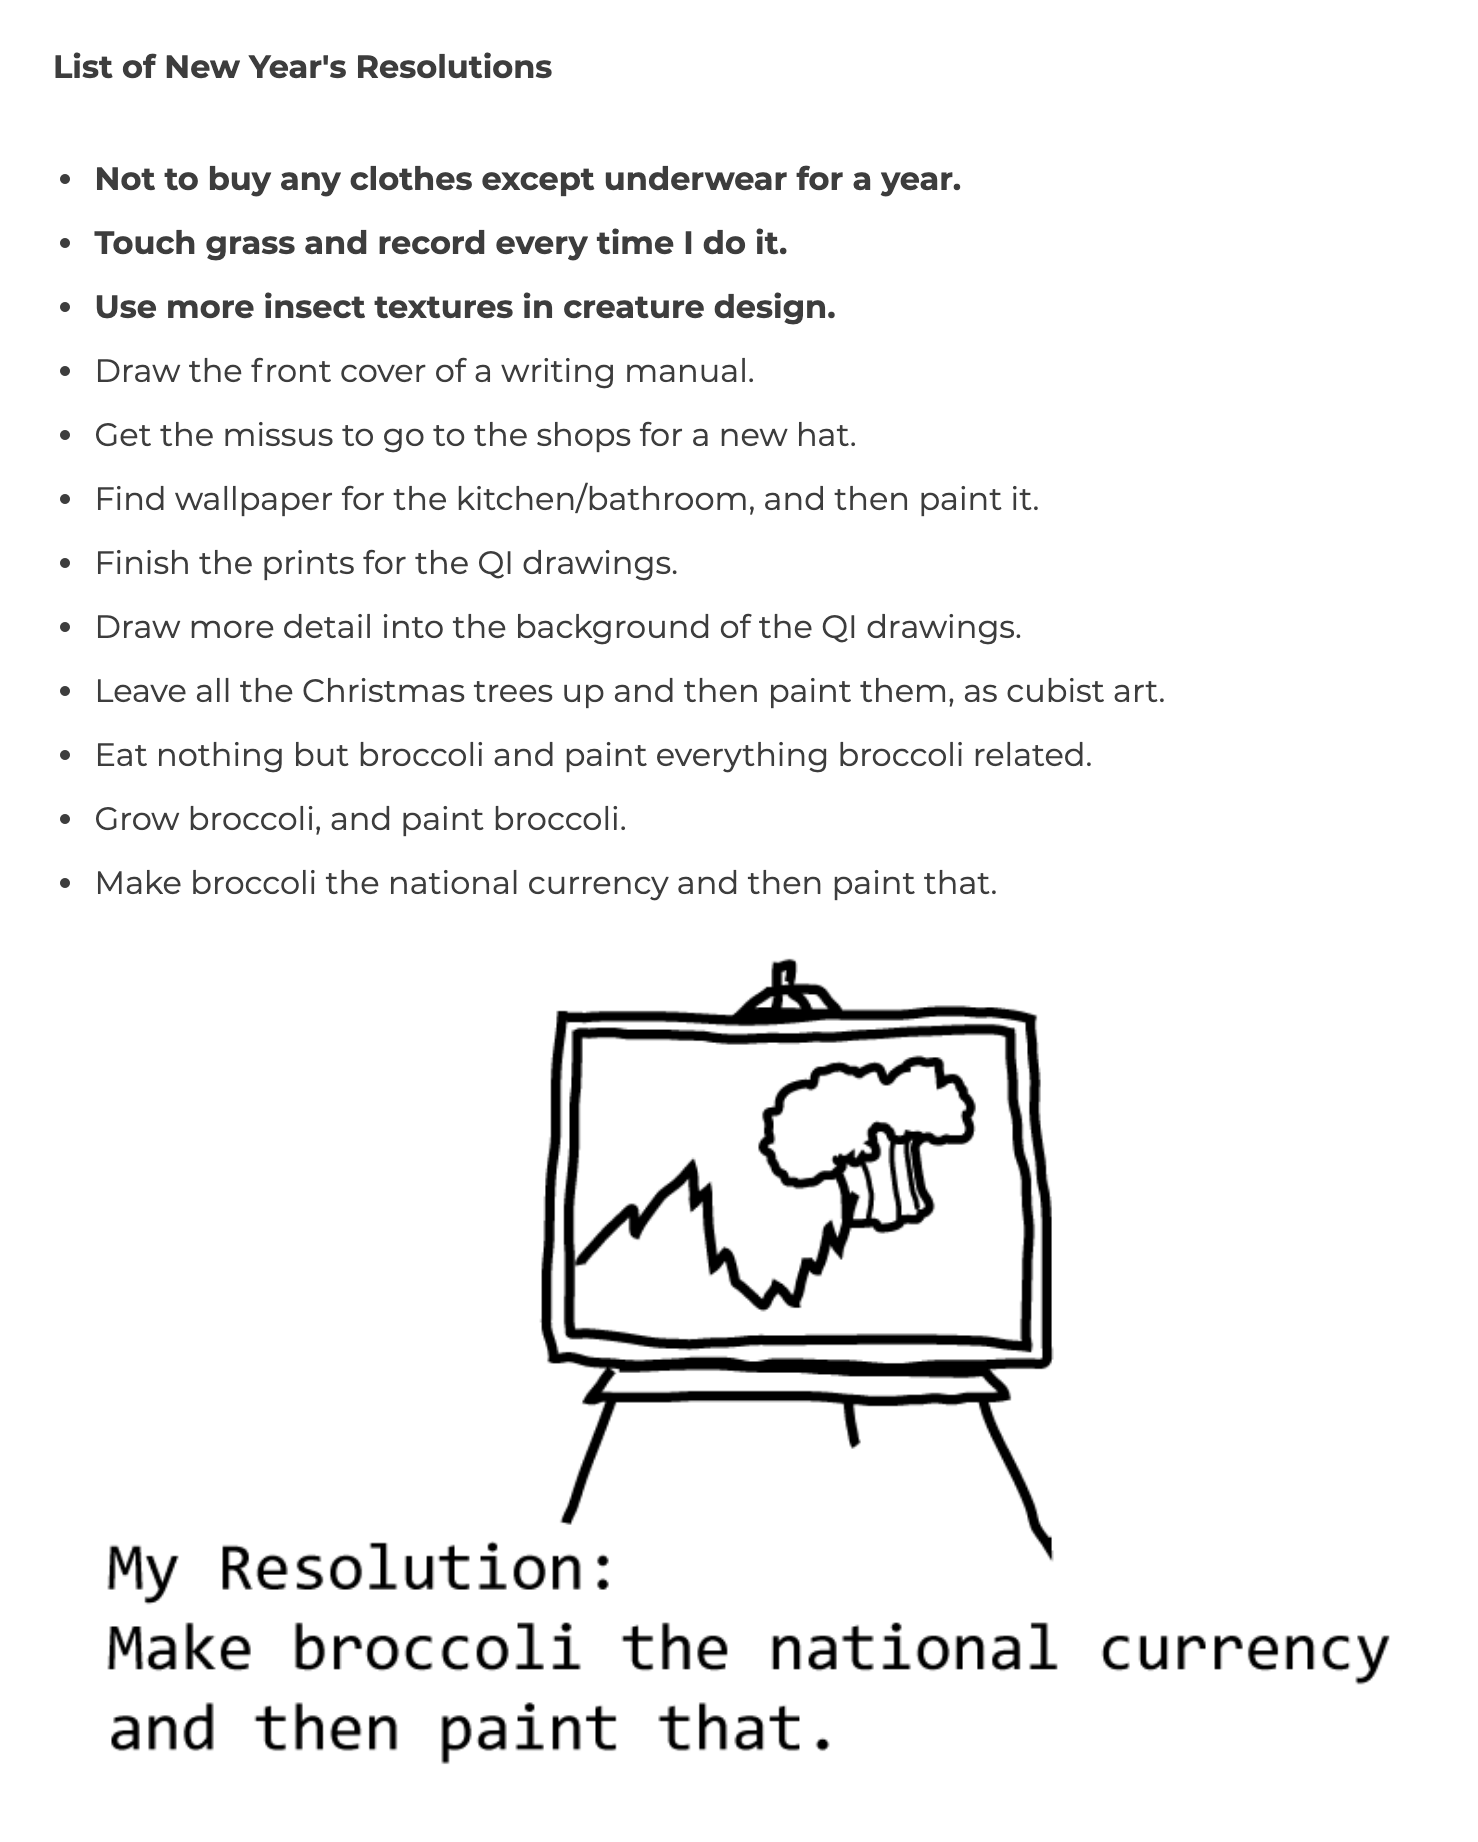 nlp_new_years_resolutions